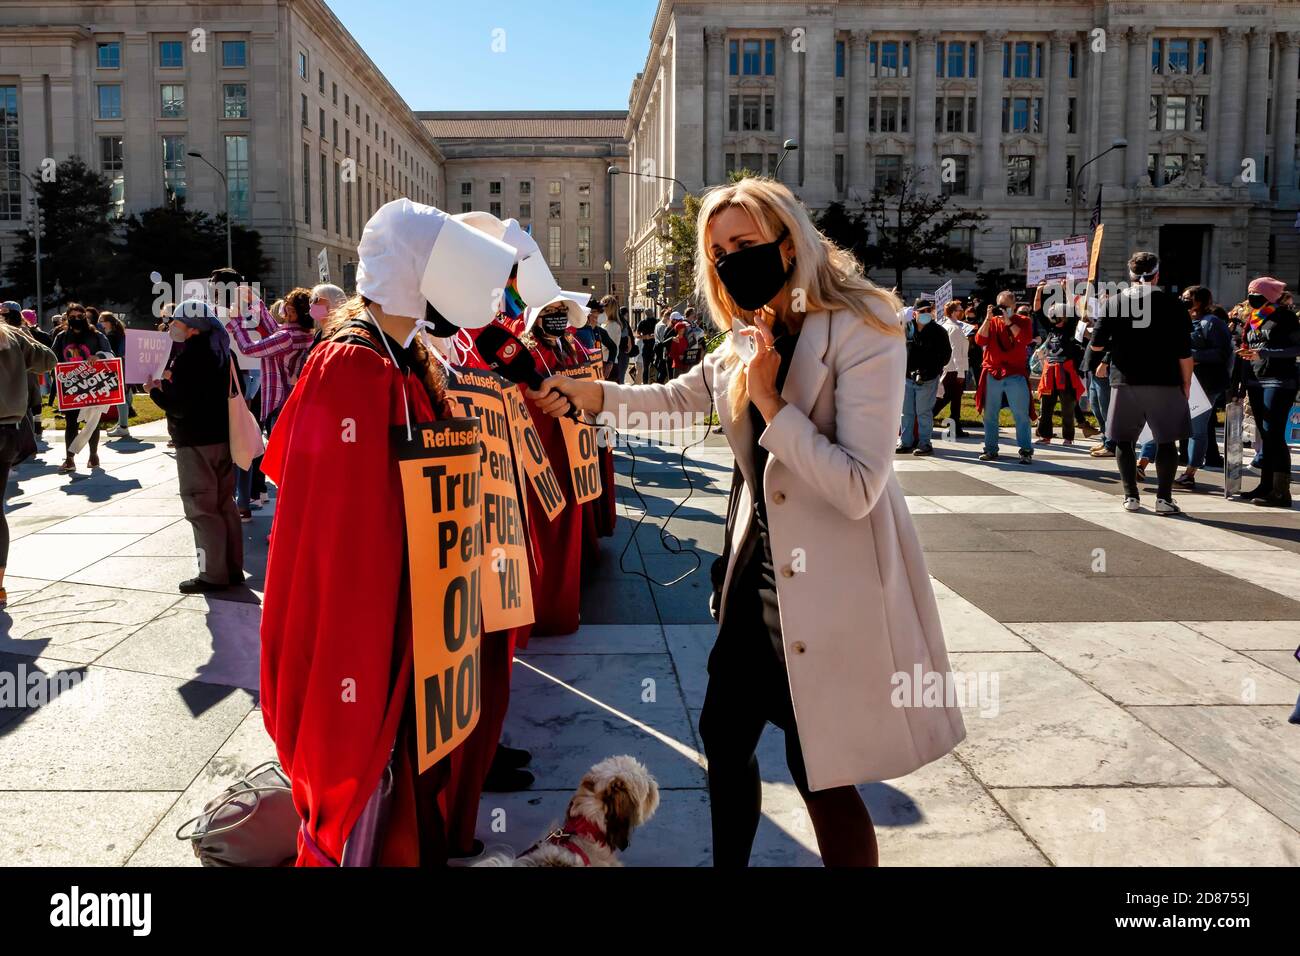 A reporter interviewing women dressed as handmaids at the Women's March in Freedom Plaza, Washington, DC, United States Stock Photo